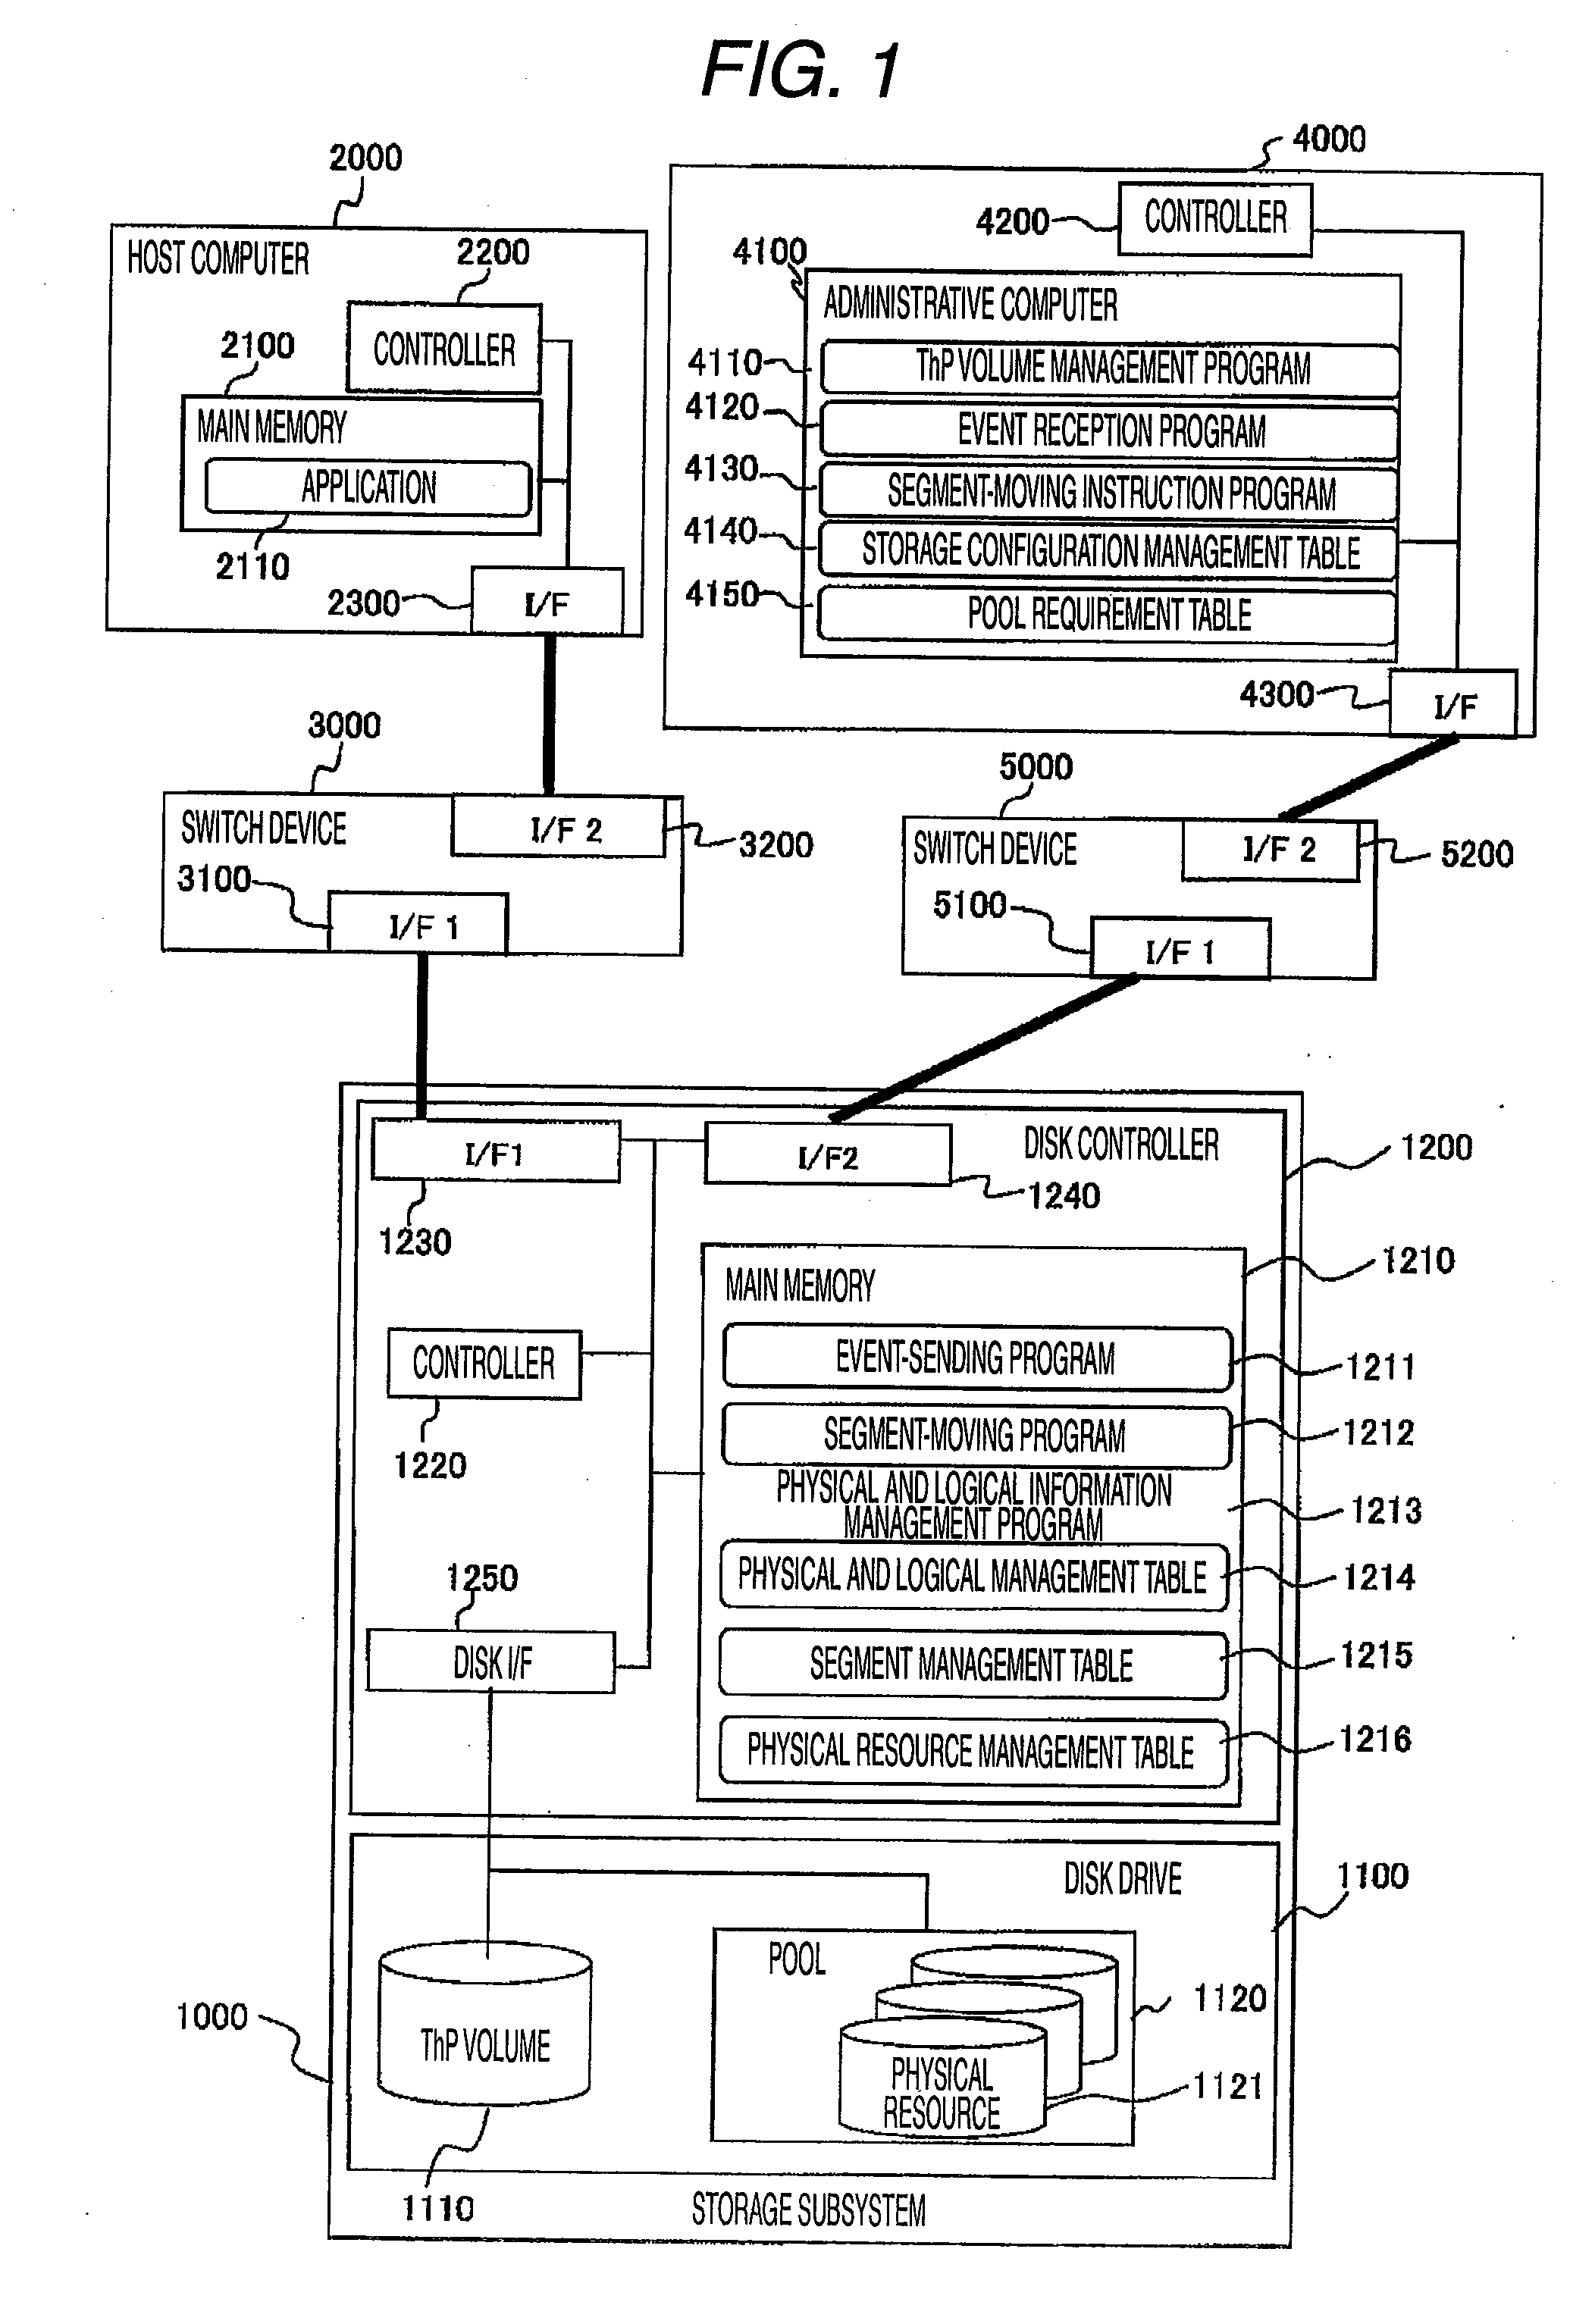 Method of moving data in logical volume, storage system, and administrative computer